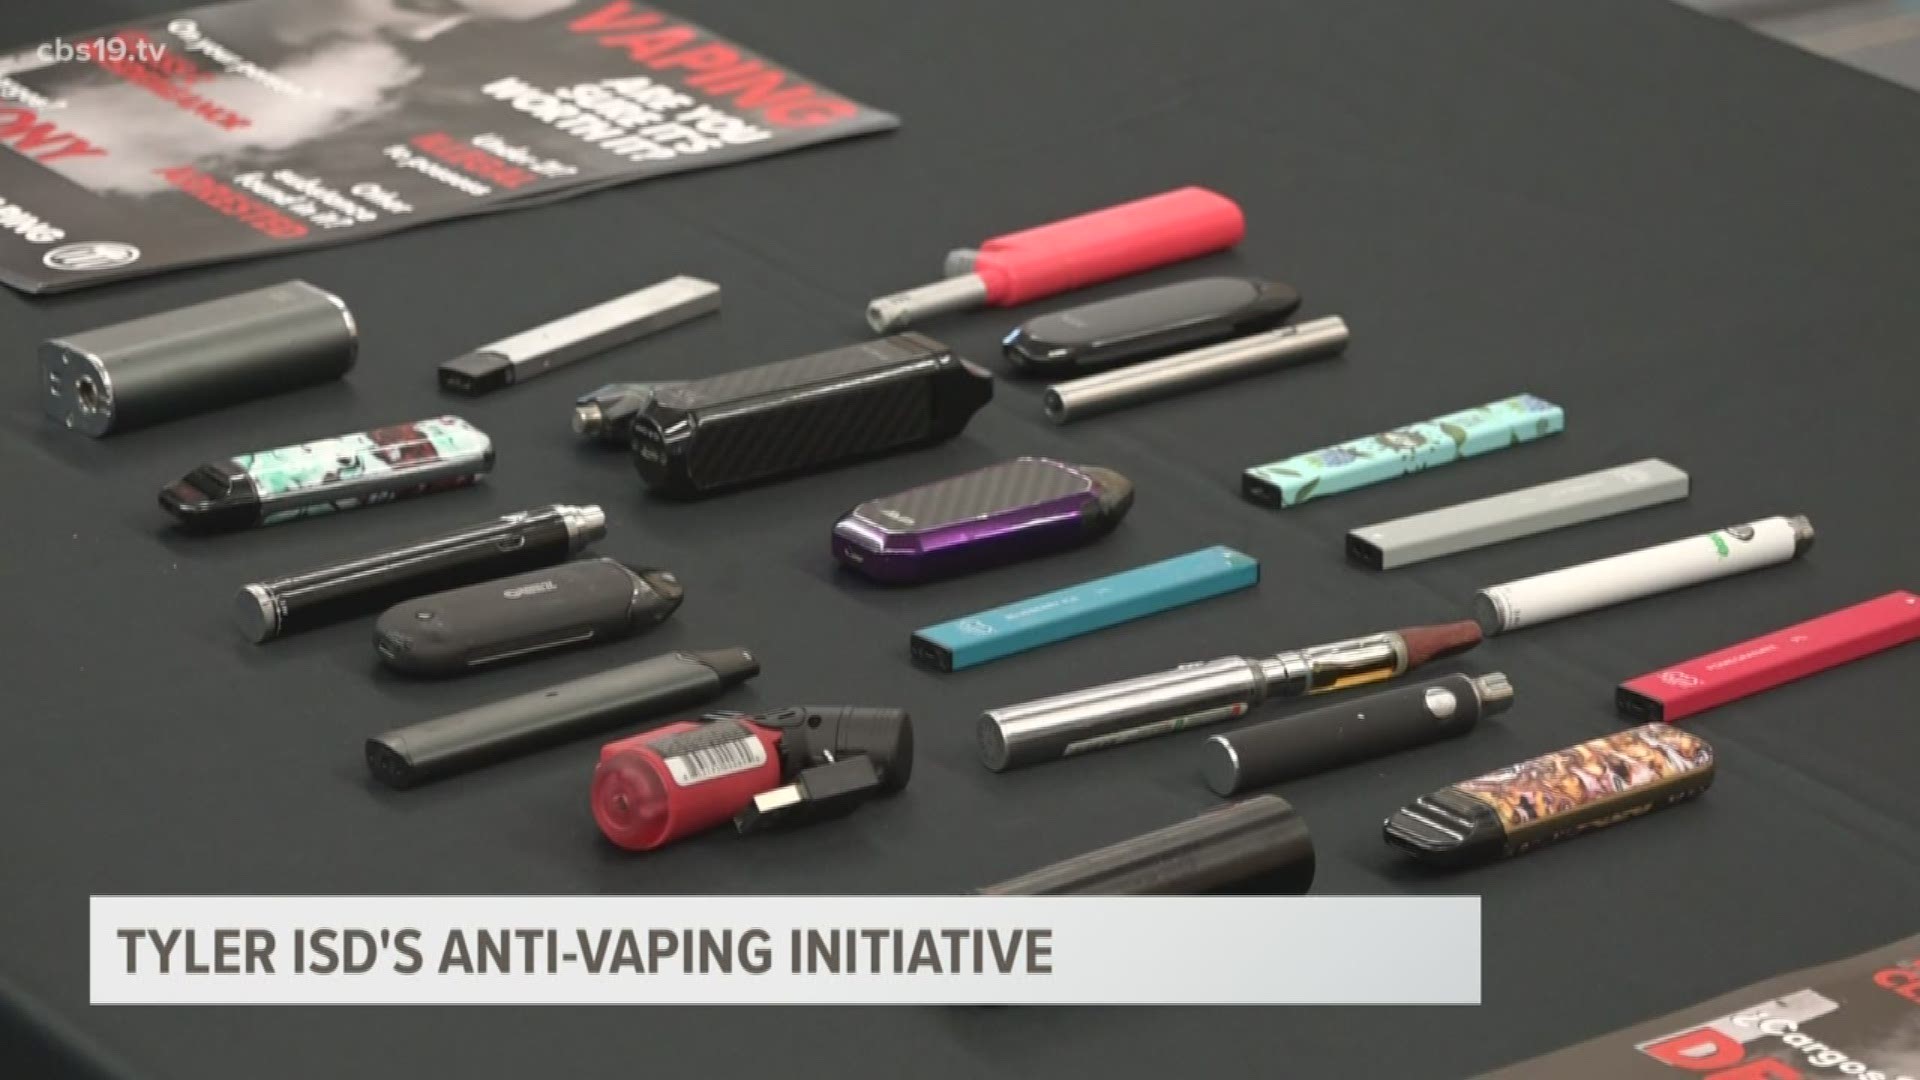 Tyler ISD is launching an anti-vaping initiative to educate parents, students, and the community on the legal ramifications of vaping, especially with THC.